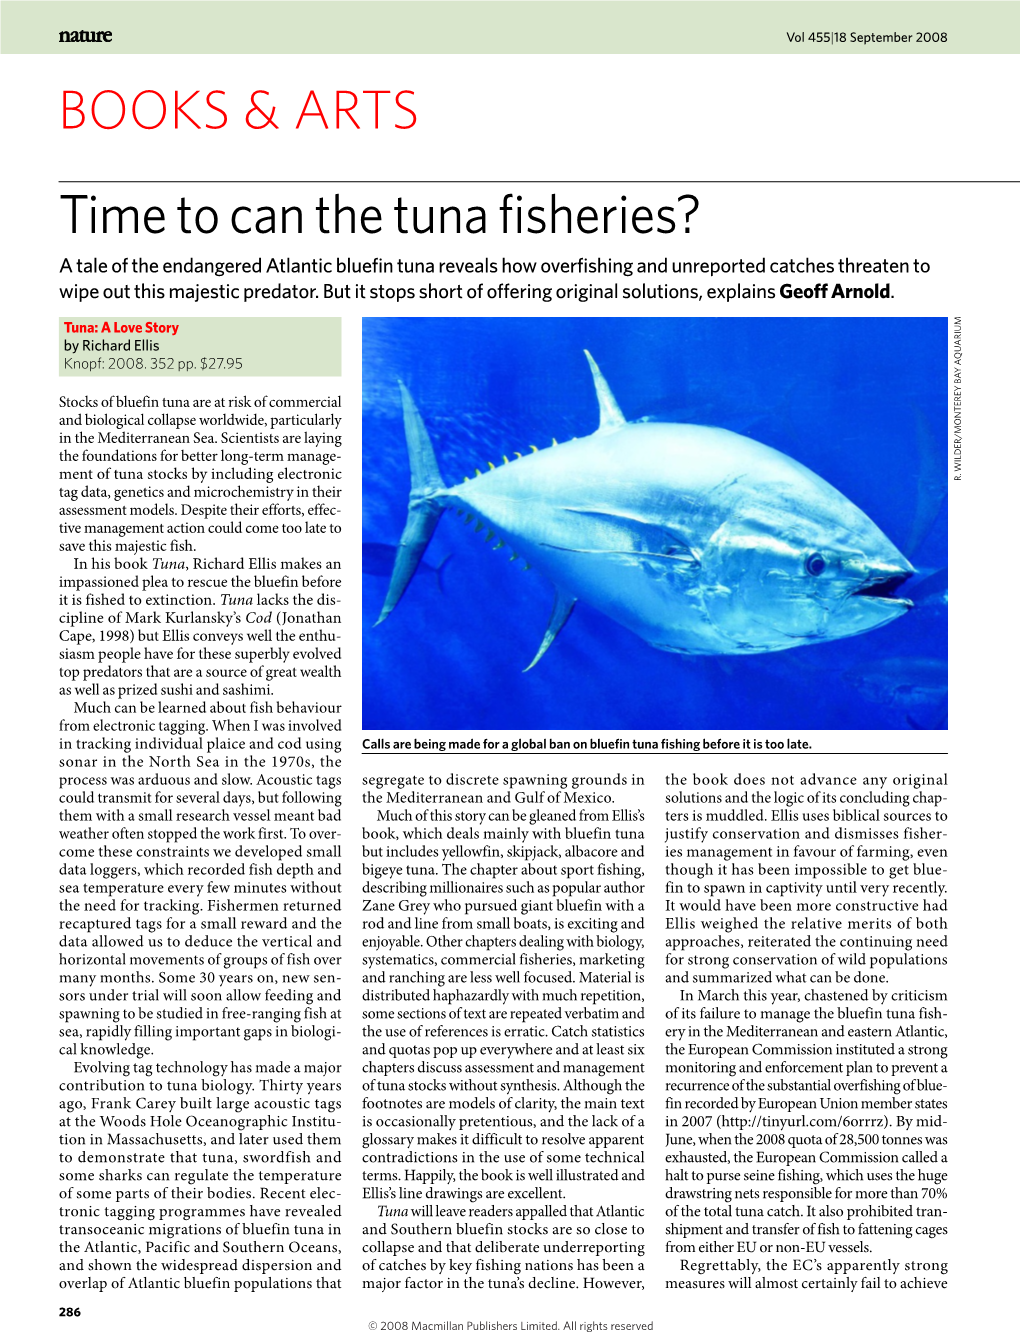 Time to Can the Tuna Fisheries?